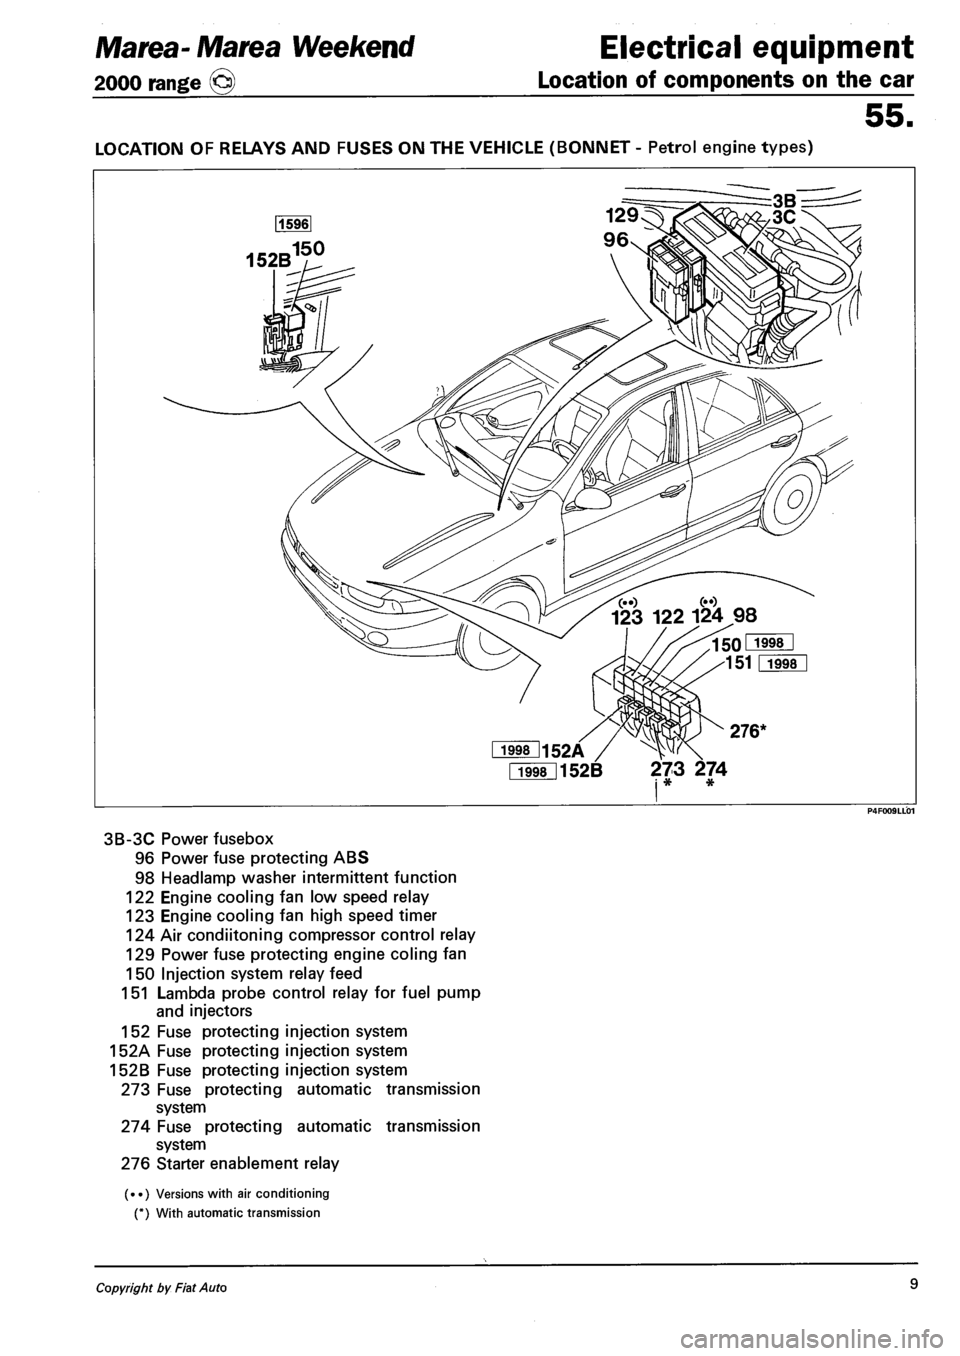 FIAT MAREA 2000 1.G User Guide Marea-Marea Weekend Electrical equipment 
2000 range (§) Location of components on the car 
55. 
LOCATION OF RELAYS AND FUSES ON THE VEHICLE (BONNET - Petrol engine types) 
Fi998l152B 273 274 i * * 
